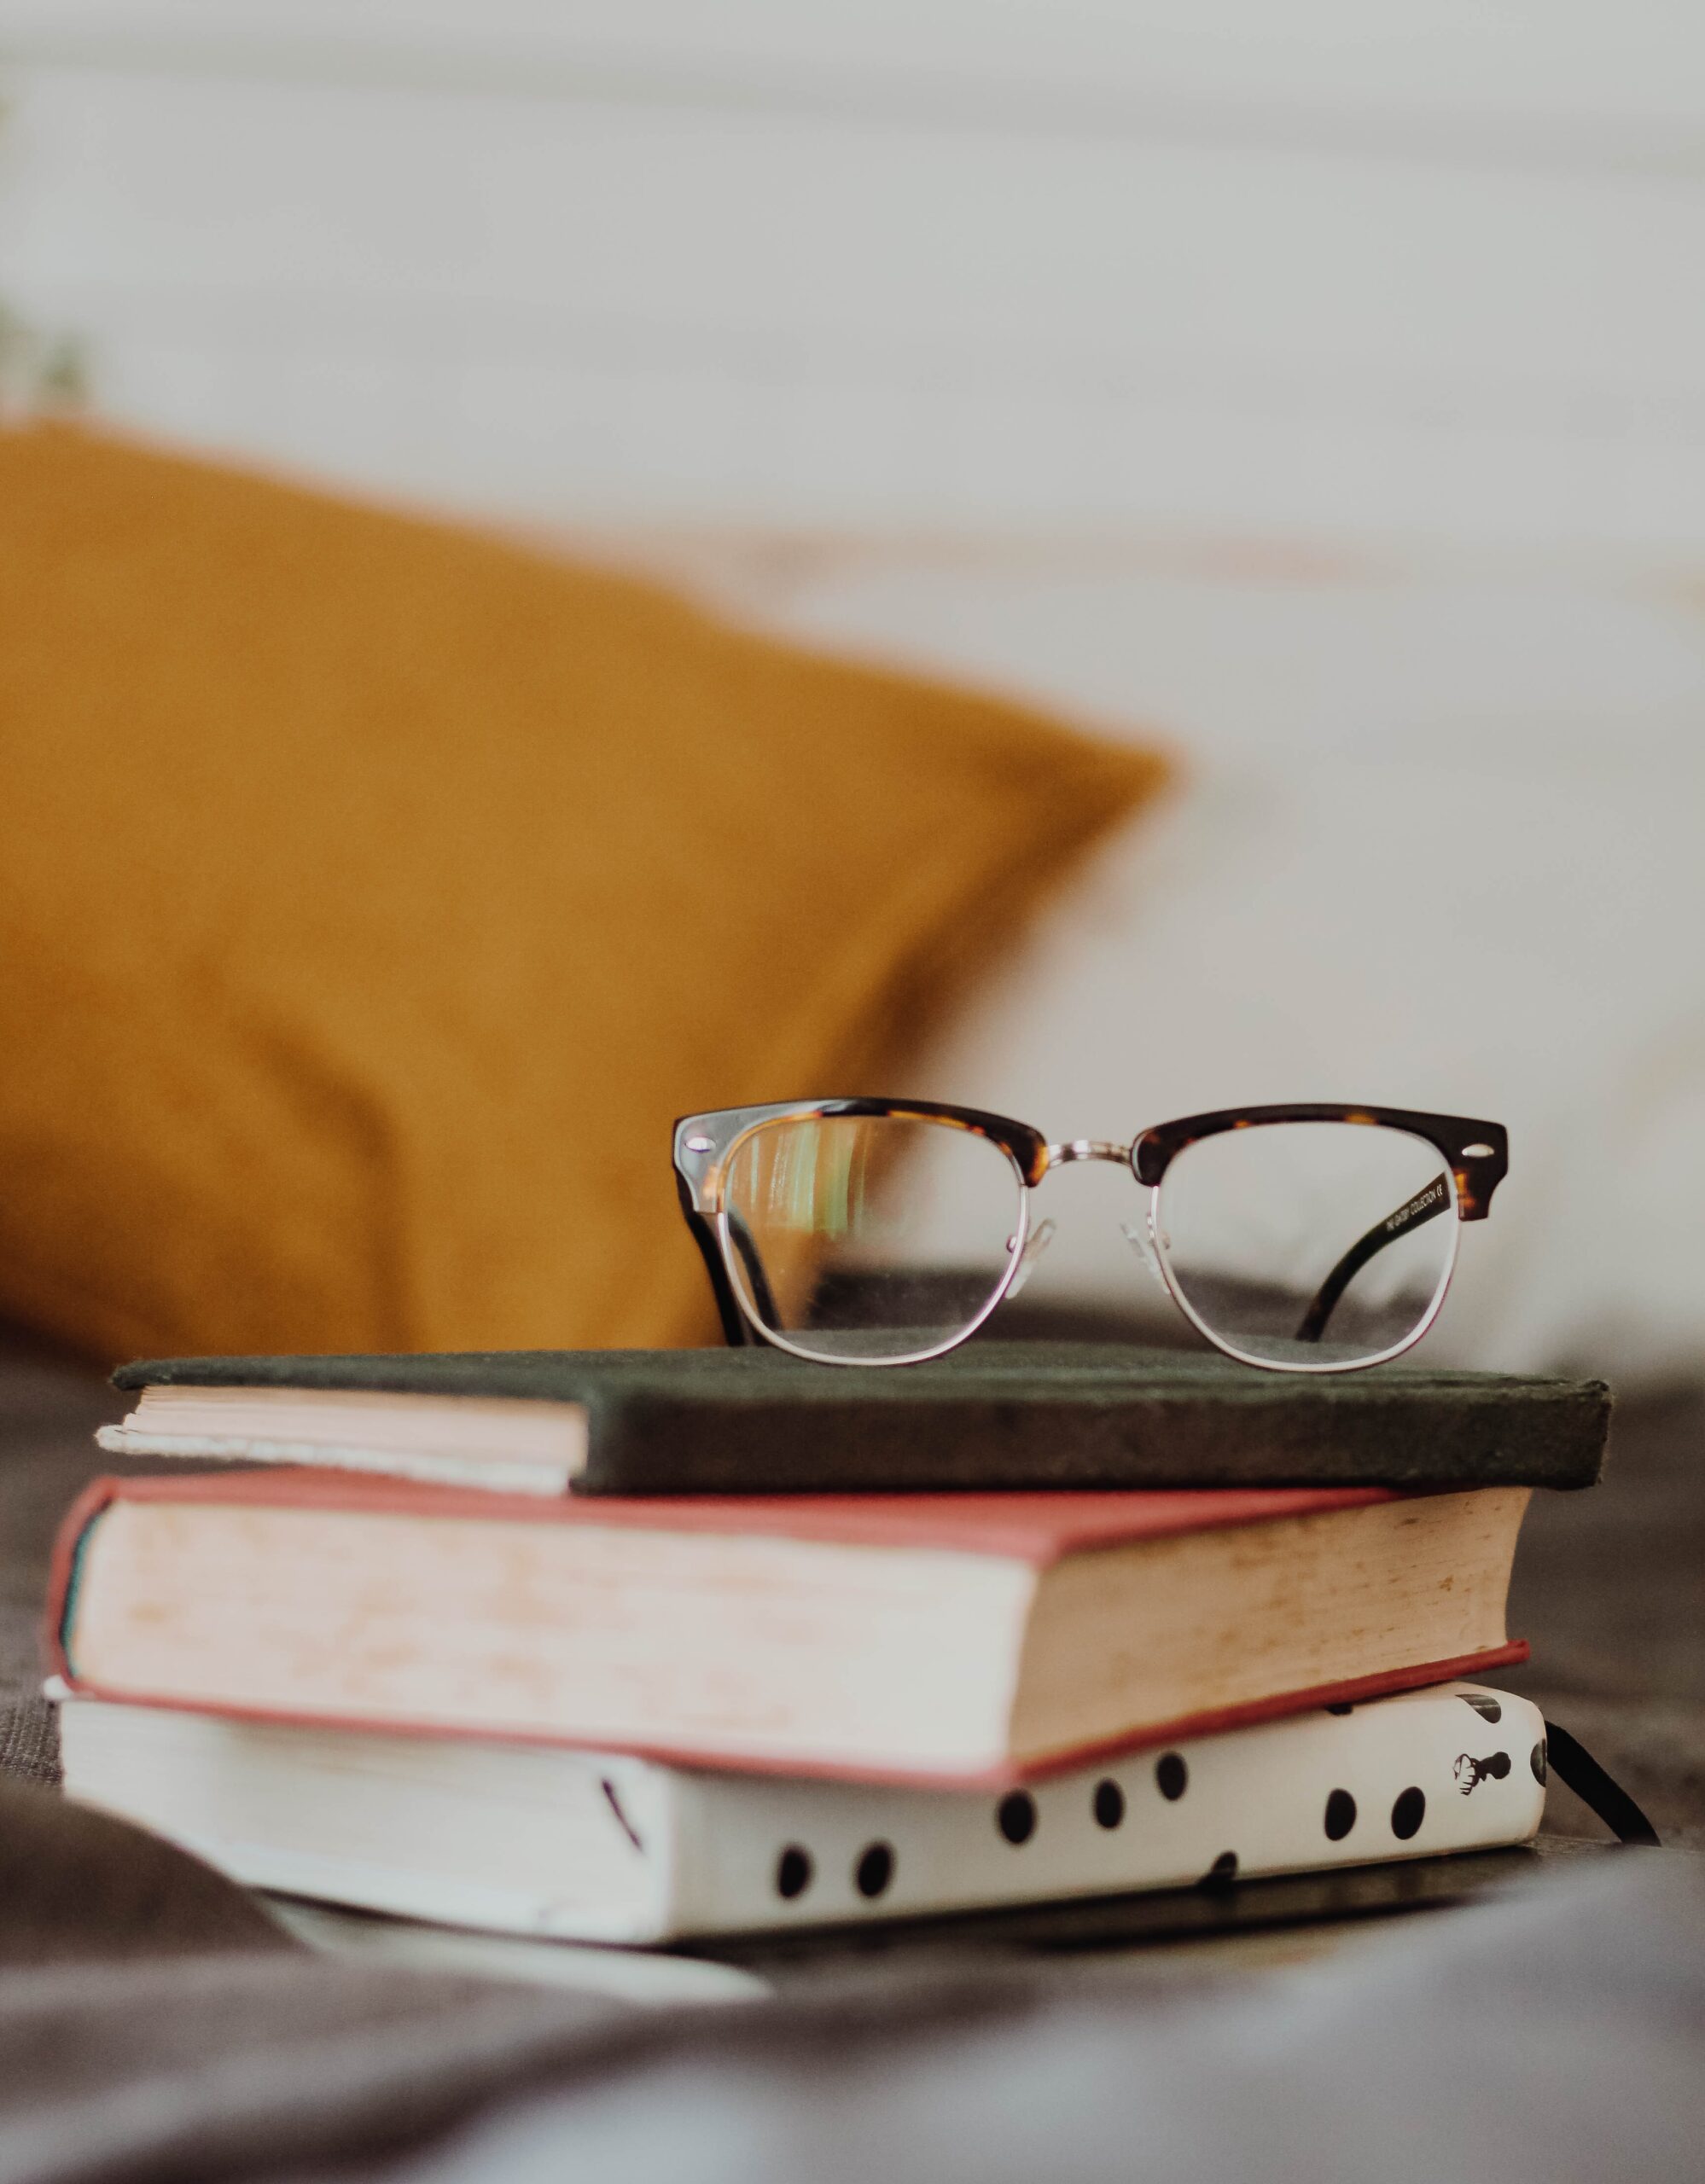 Stack of books with glasses resting on top